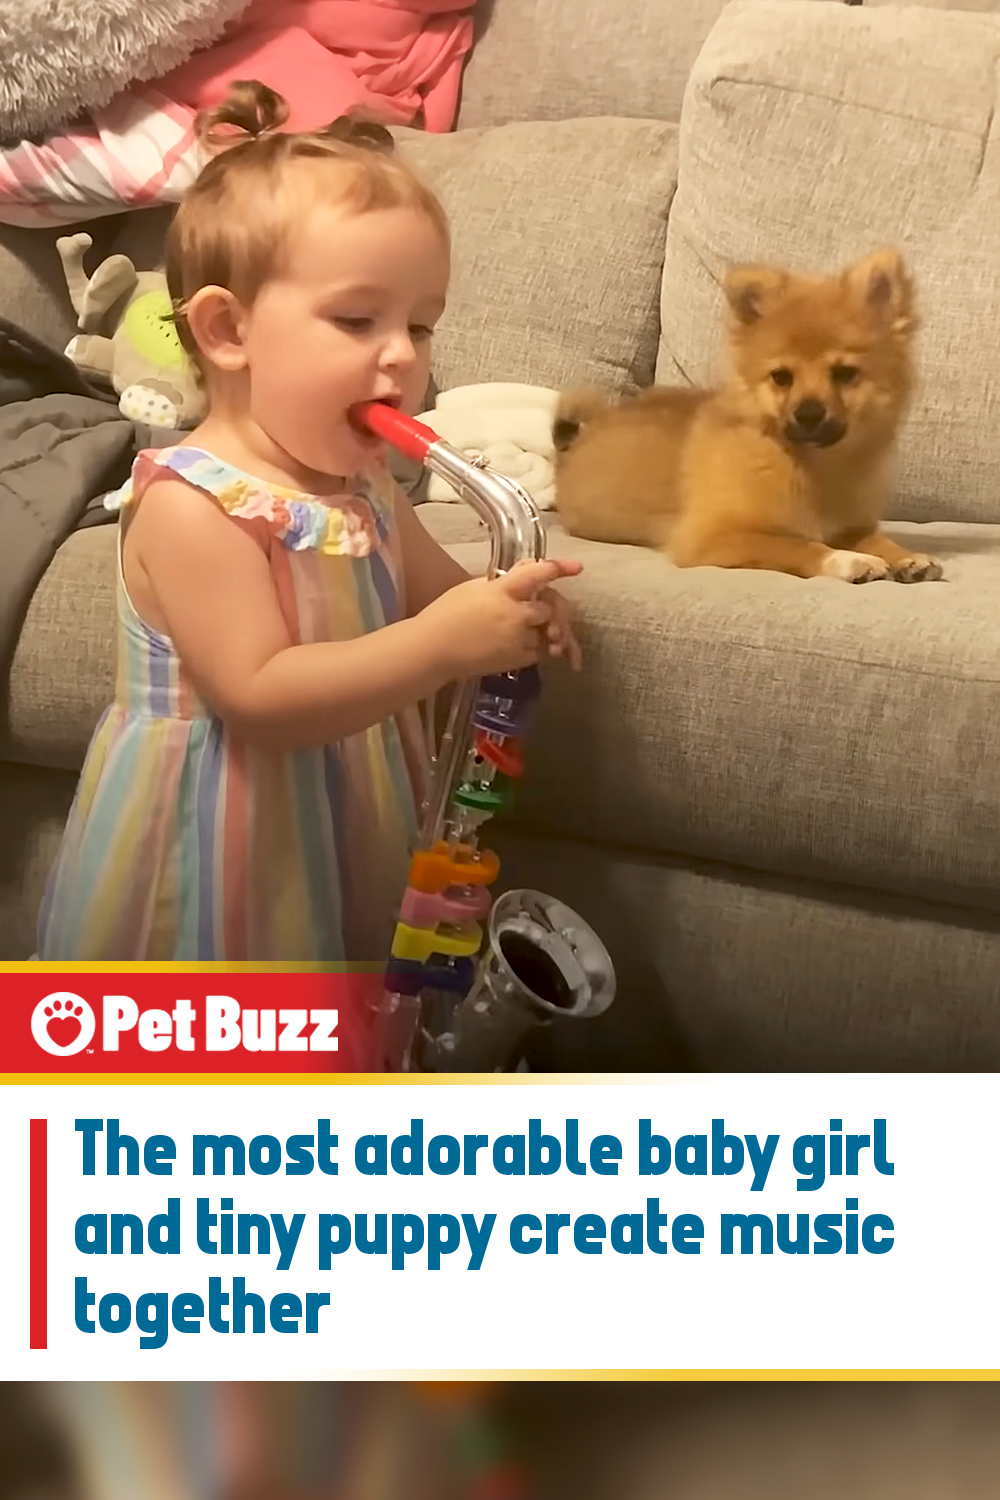 The most adorable baby girl and tiny puppy create music together